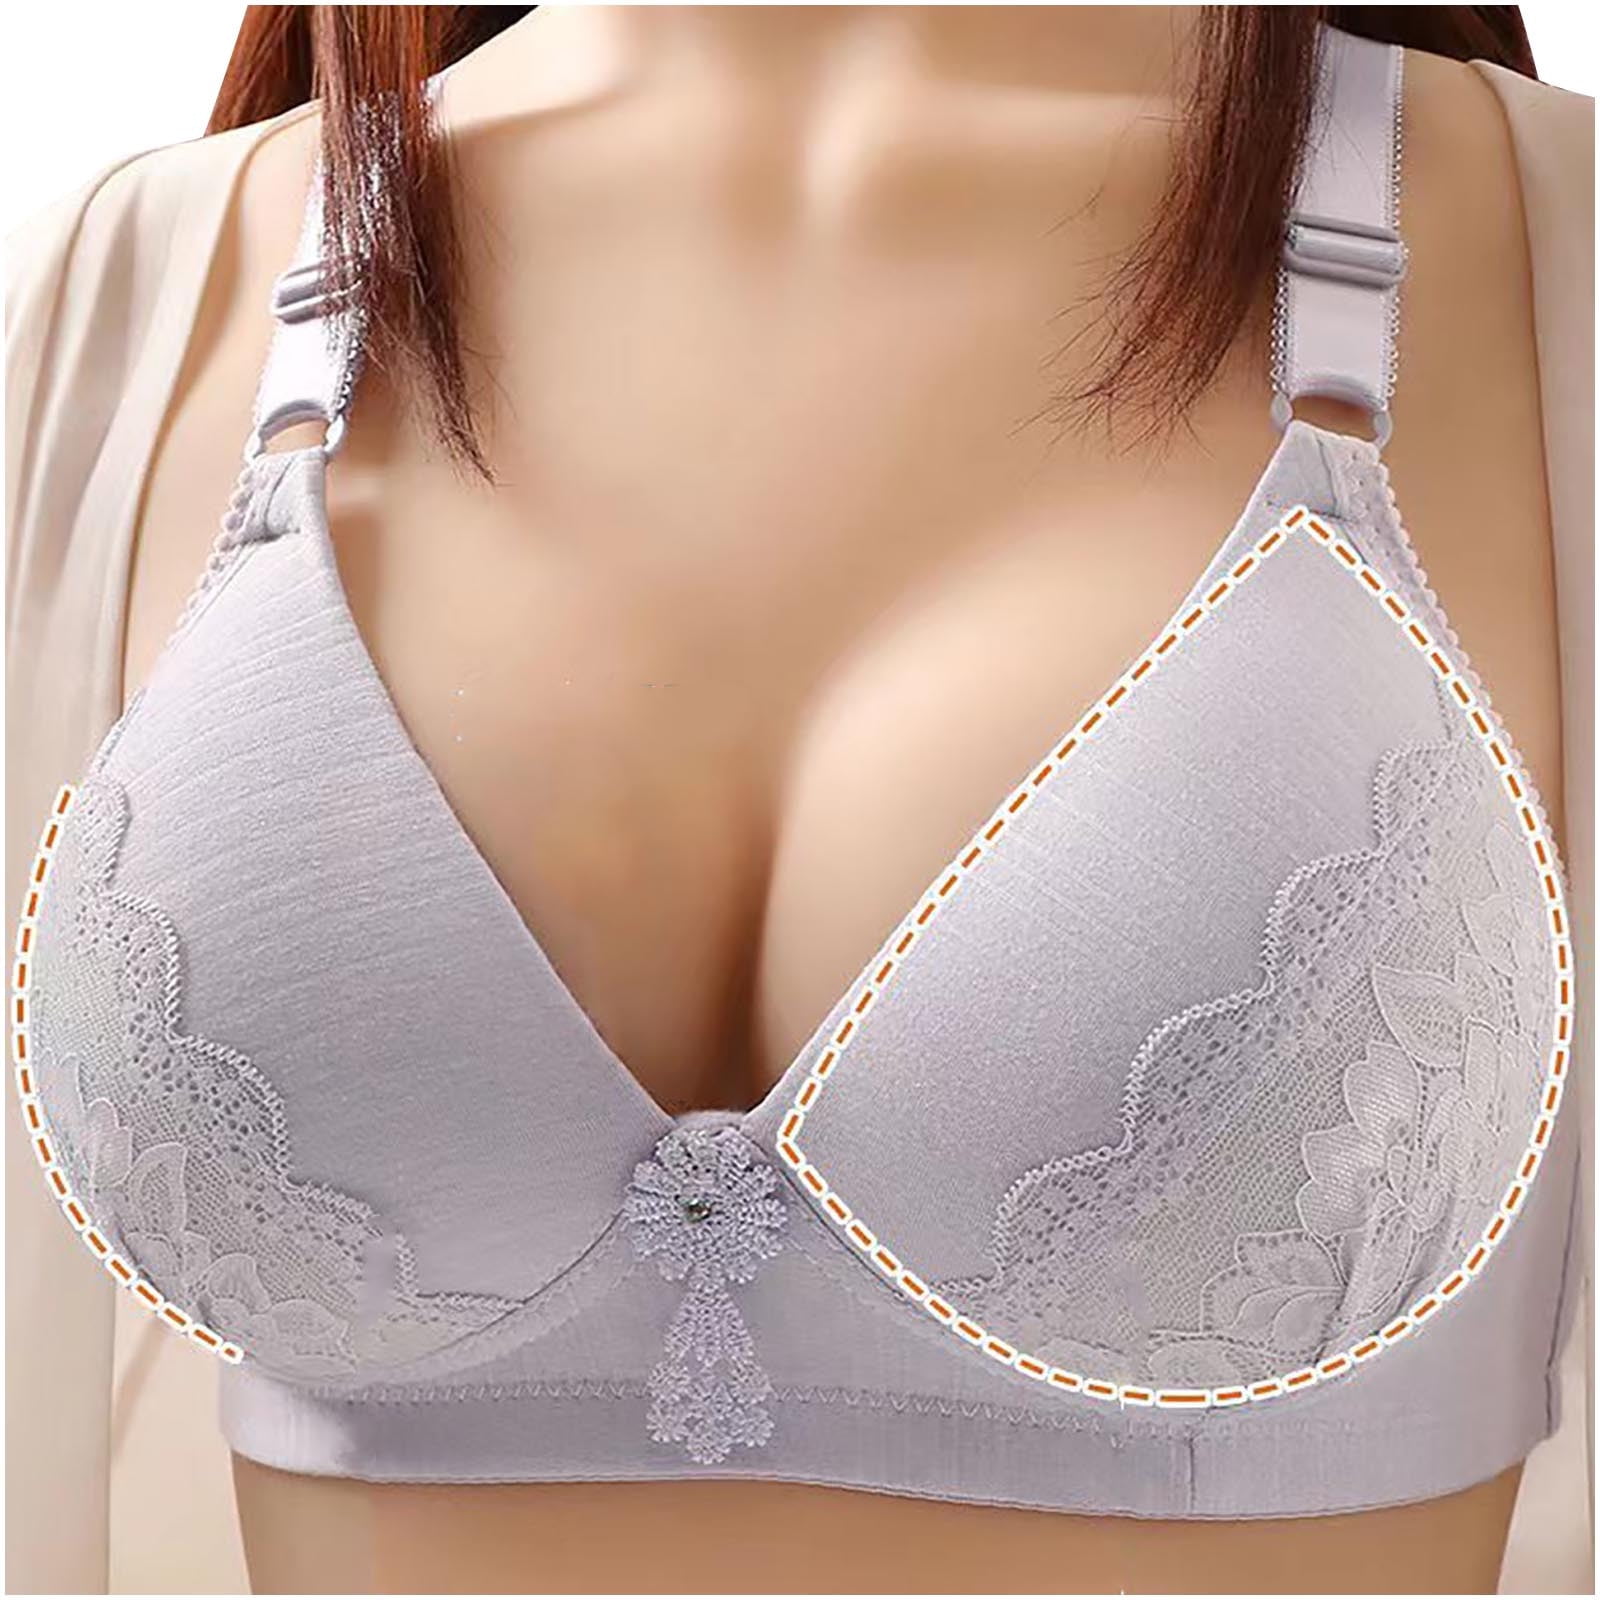 RYRJJ Women's Deep Cup Bralette Lace Floral Unpadded No Underwire Everyday Shaping  Bra Solid Wireless Lightly Lined Comfortable Push Up Bra(Gray,M) 